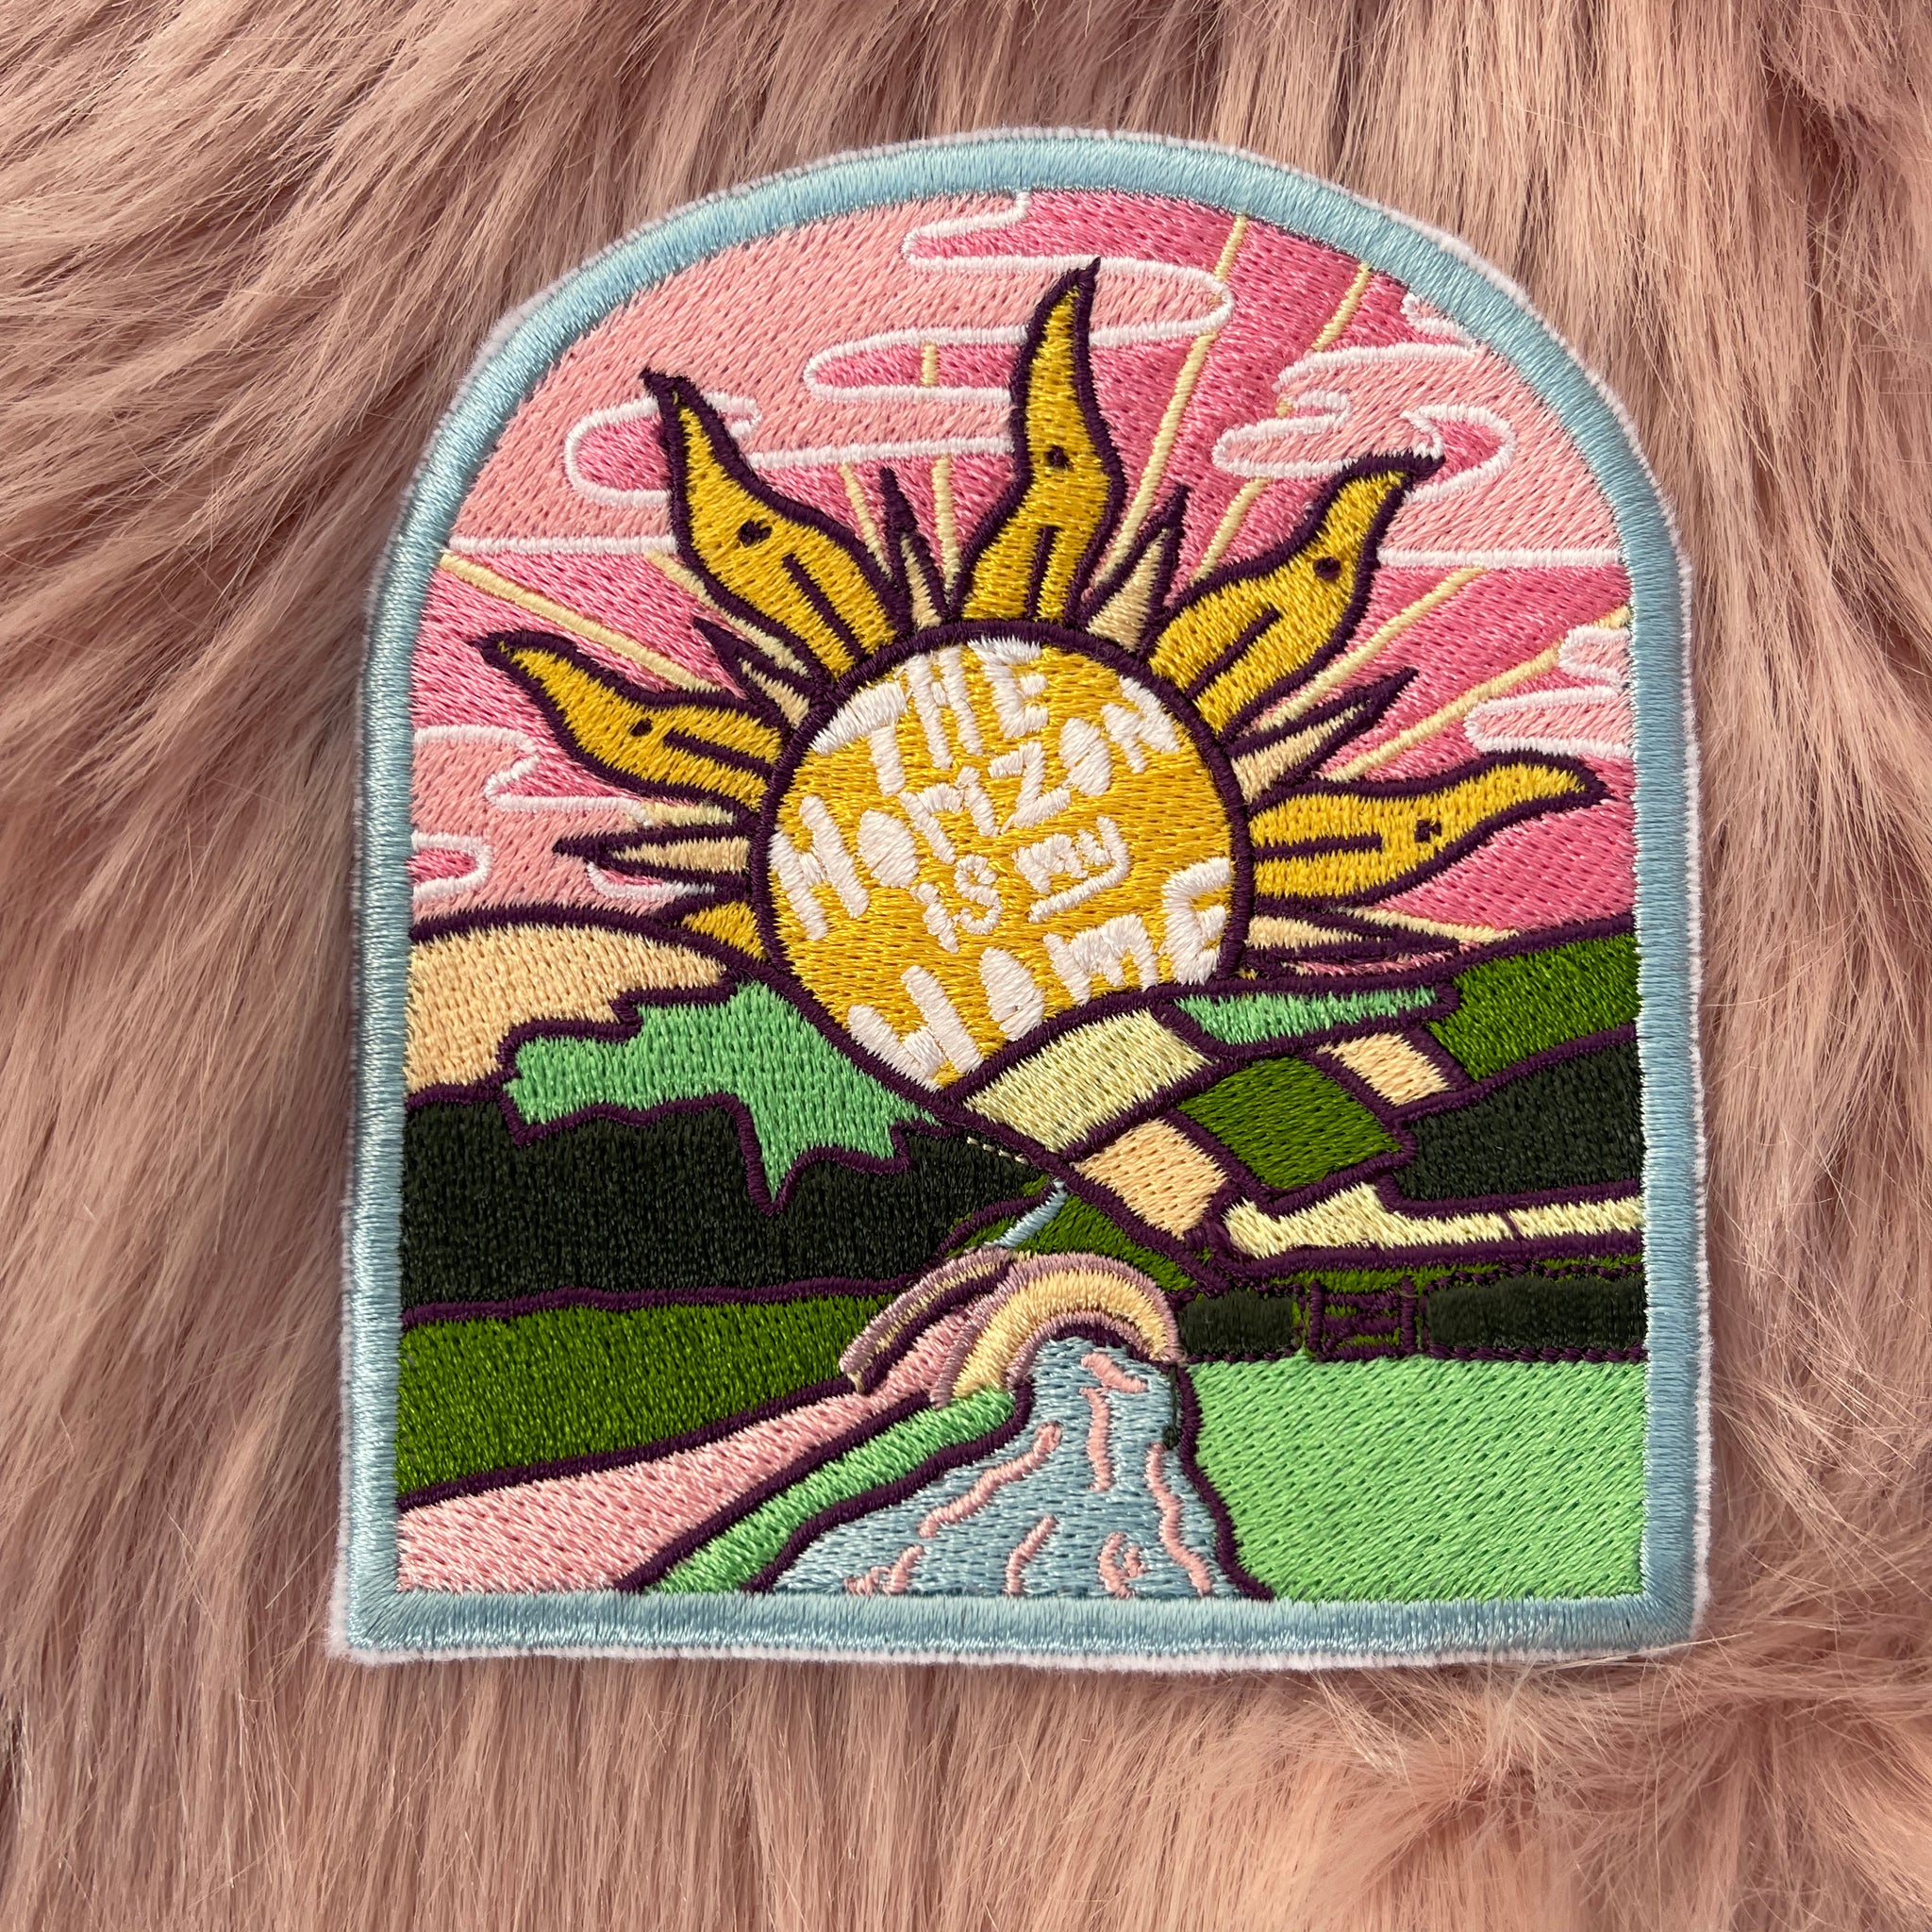 The Horizon is my Home Travel Themed Iron On Embroidery Patch